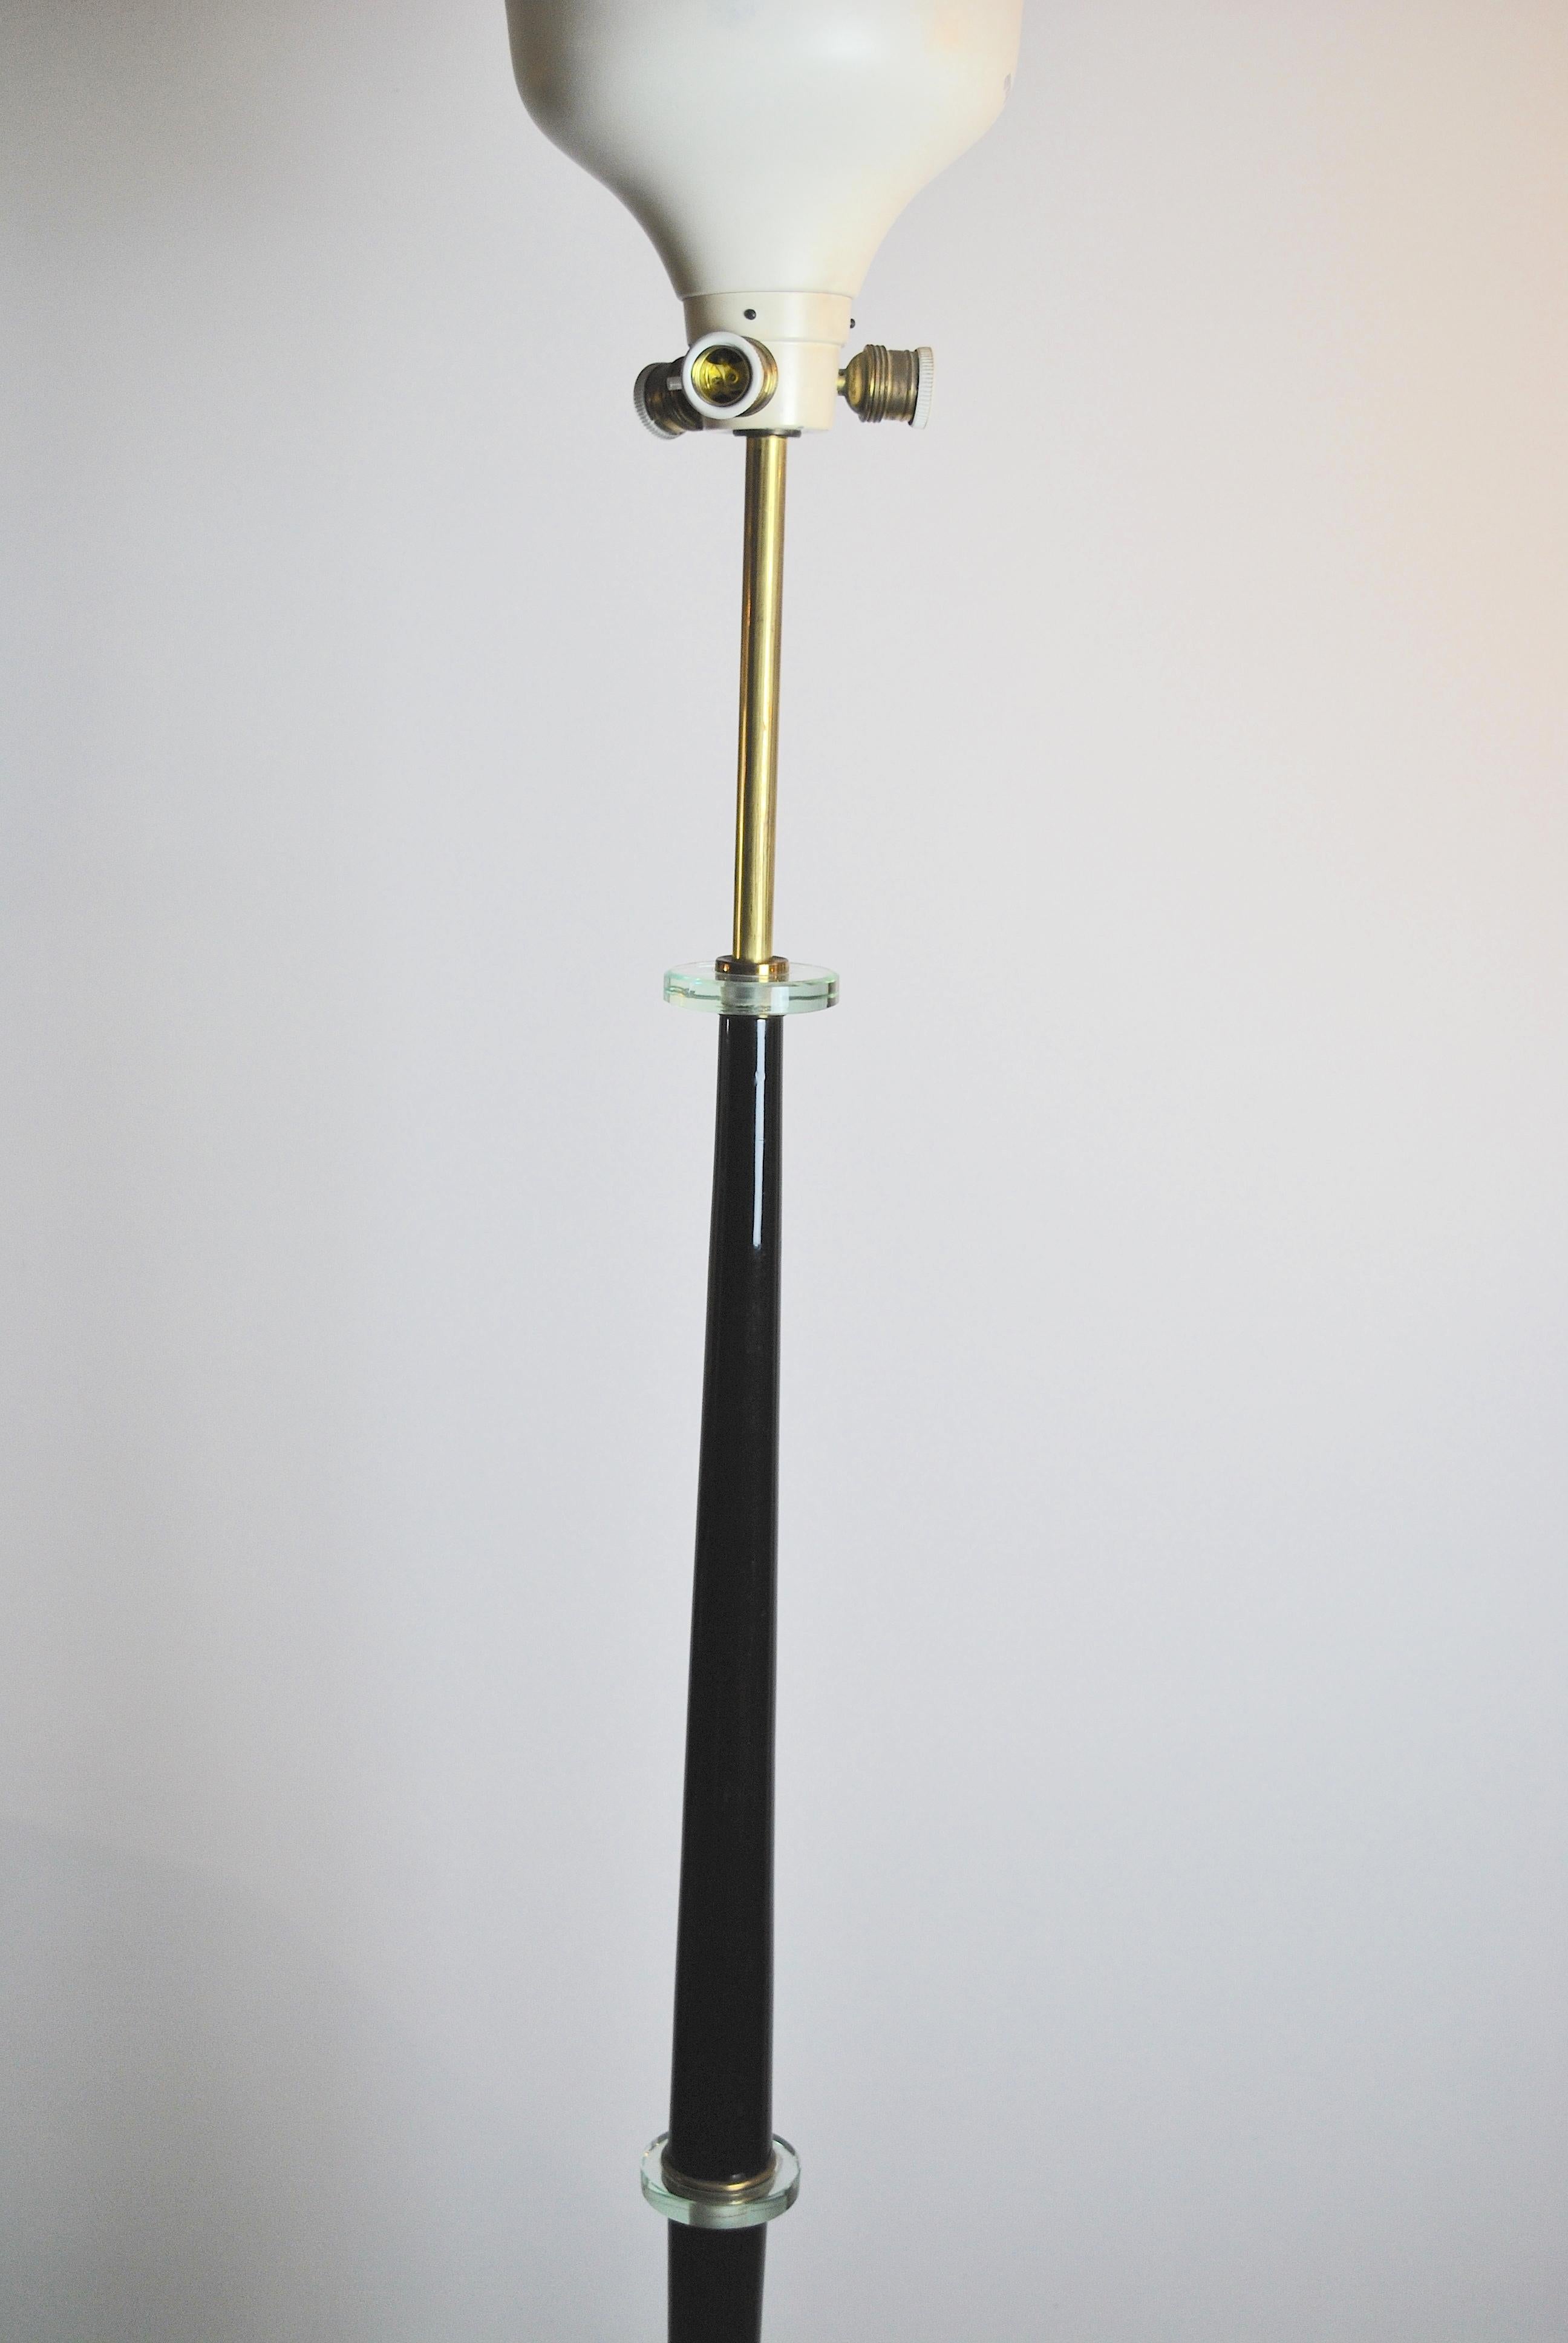 Mid-20th Century Midcentury Italian Floor Lamp in Fontana Arte Style with Brass Finishes, 1950s For Sale